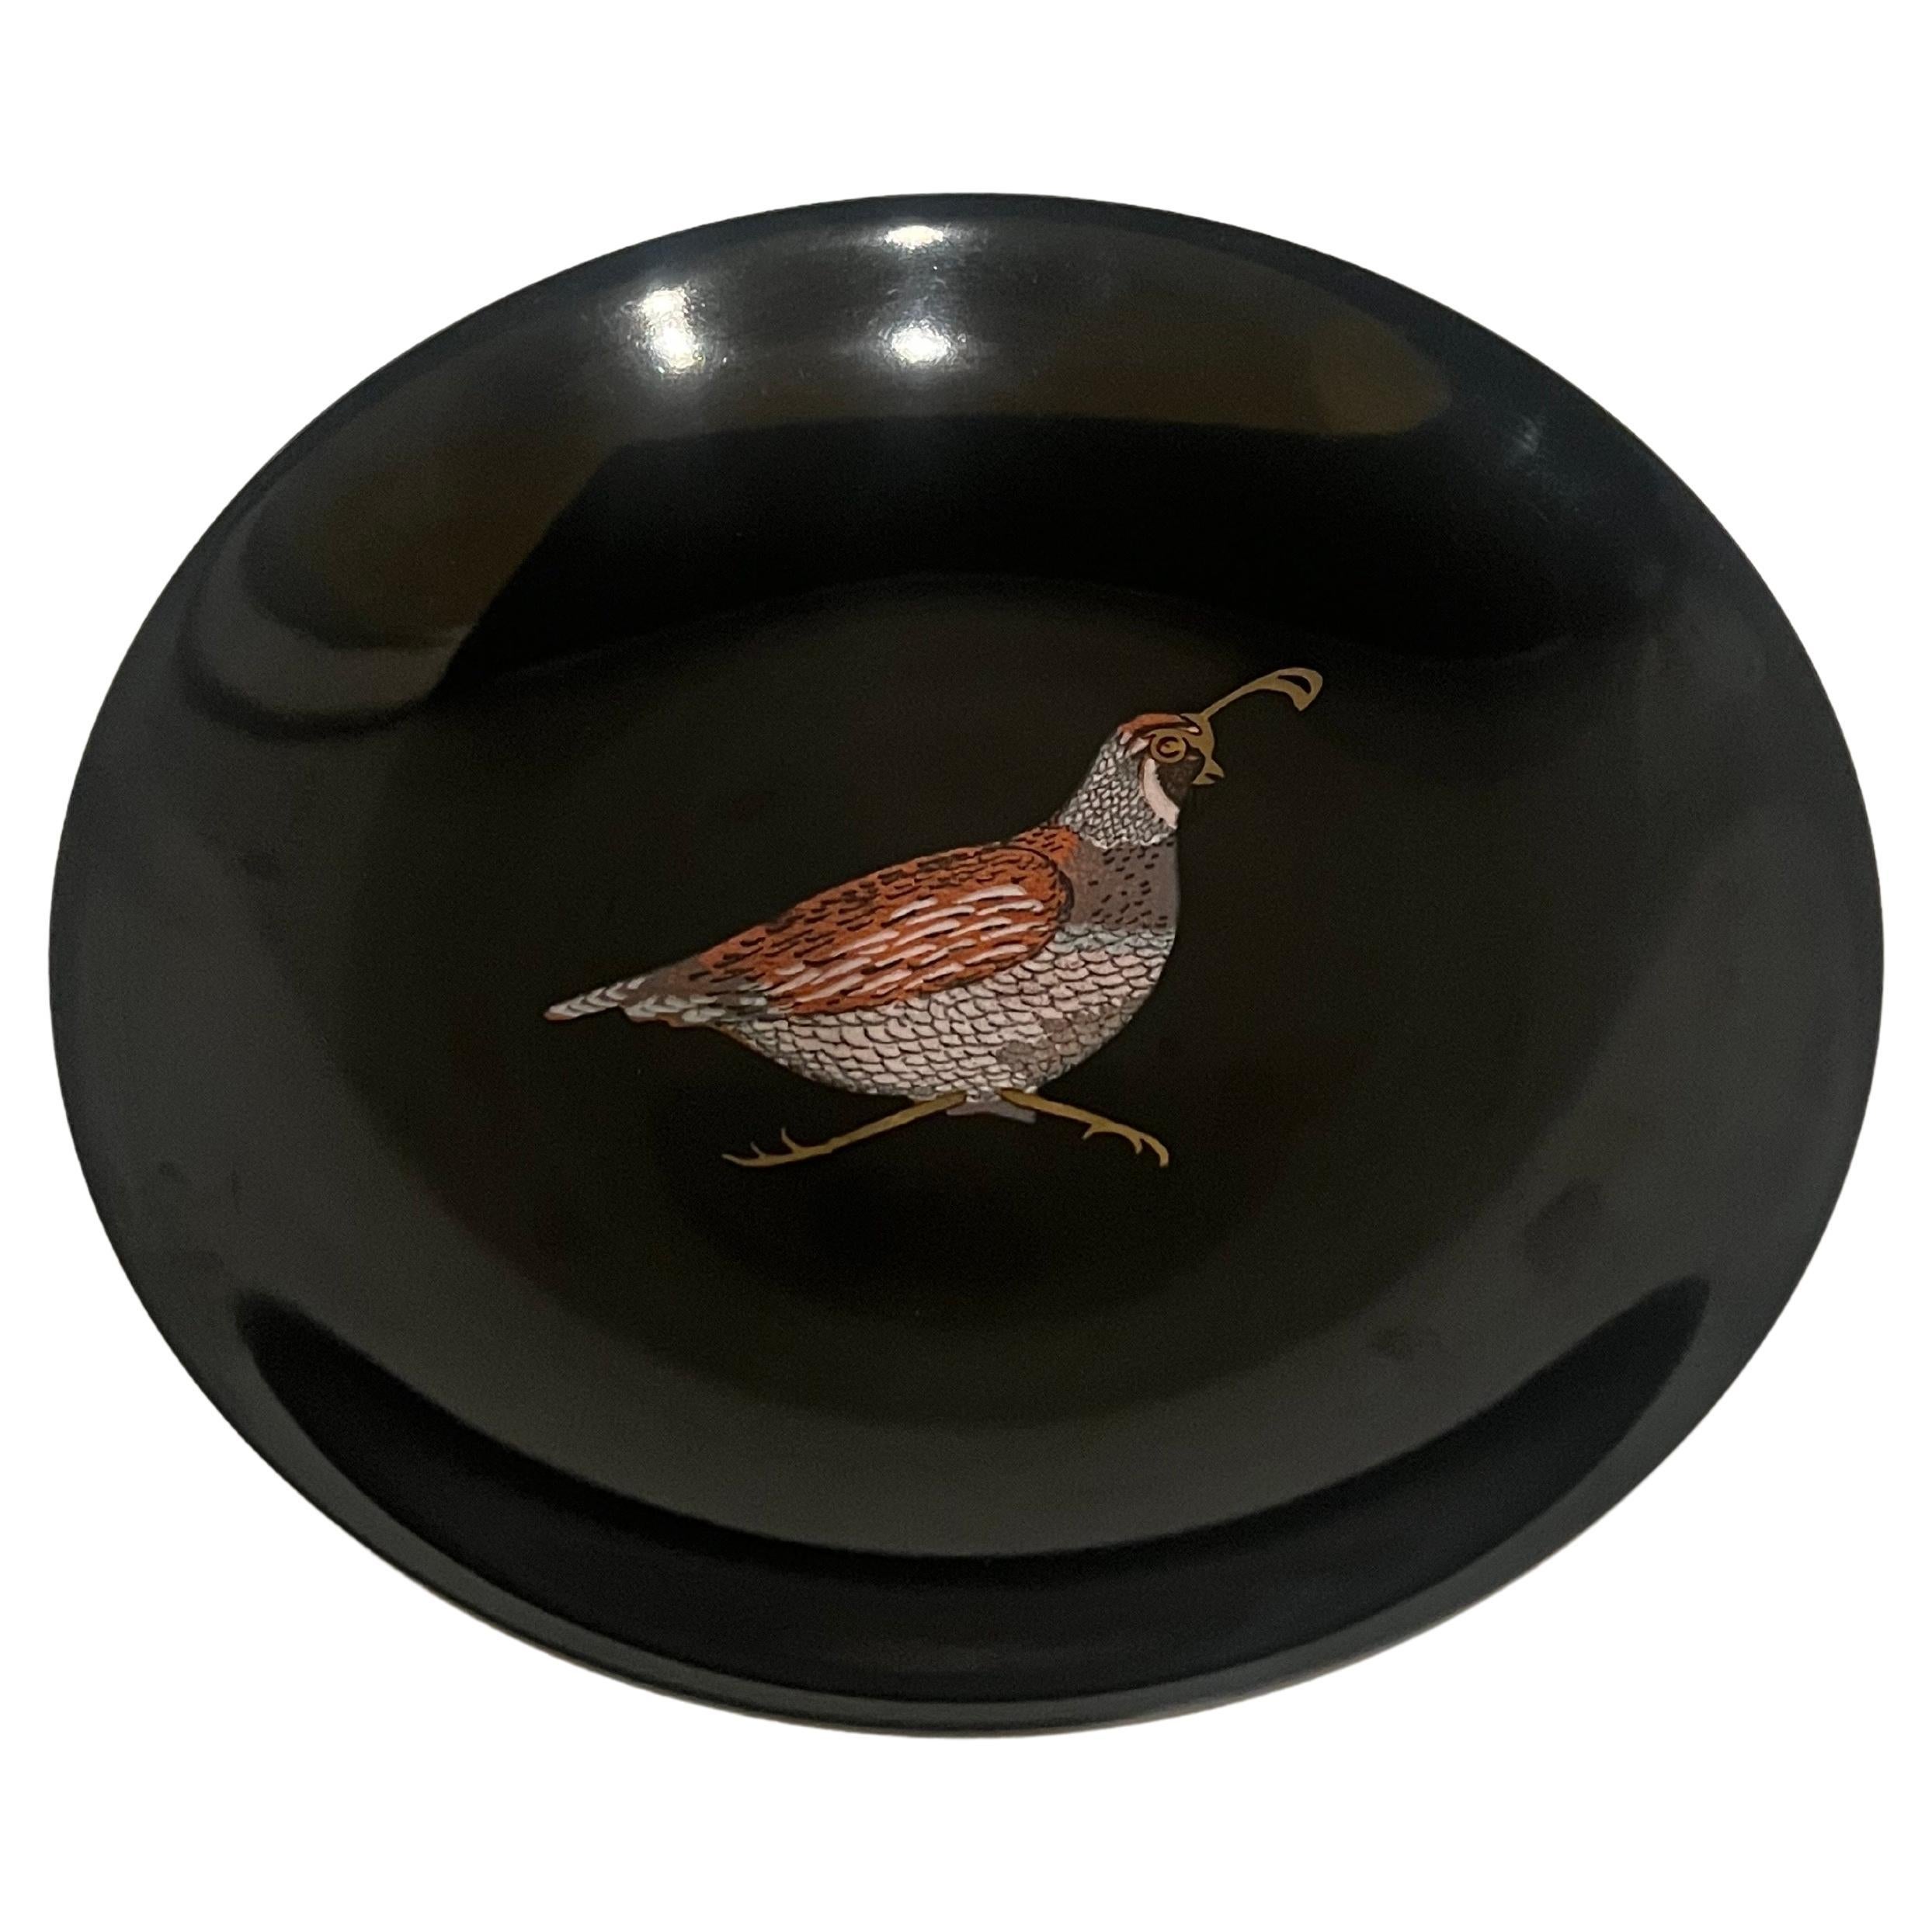 Beautiful Mid Century  Inlaid "Quail" Low Bowl Catch It All by Couroc California For Sale